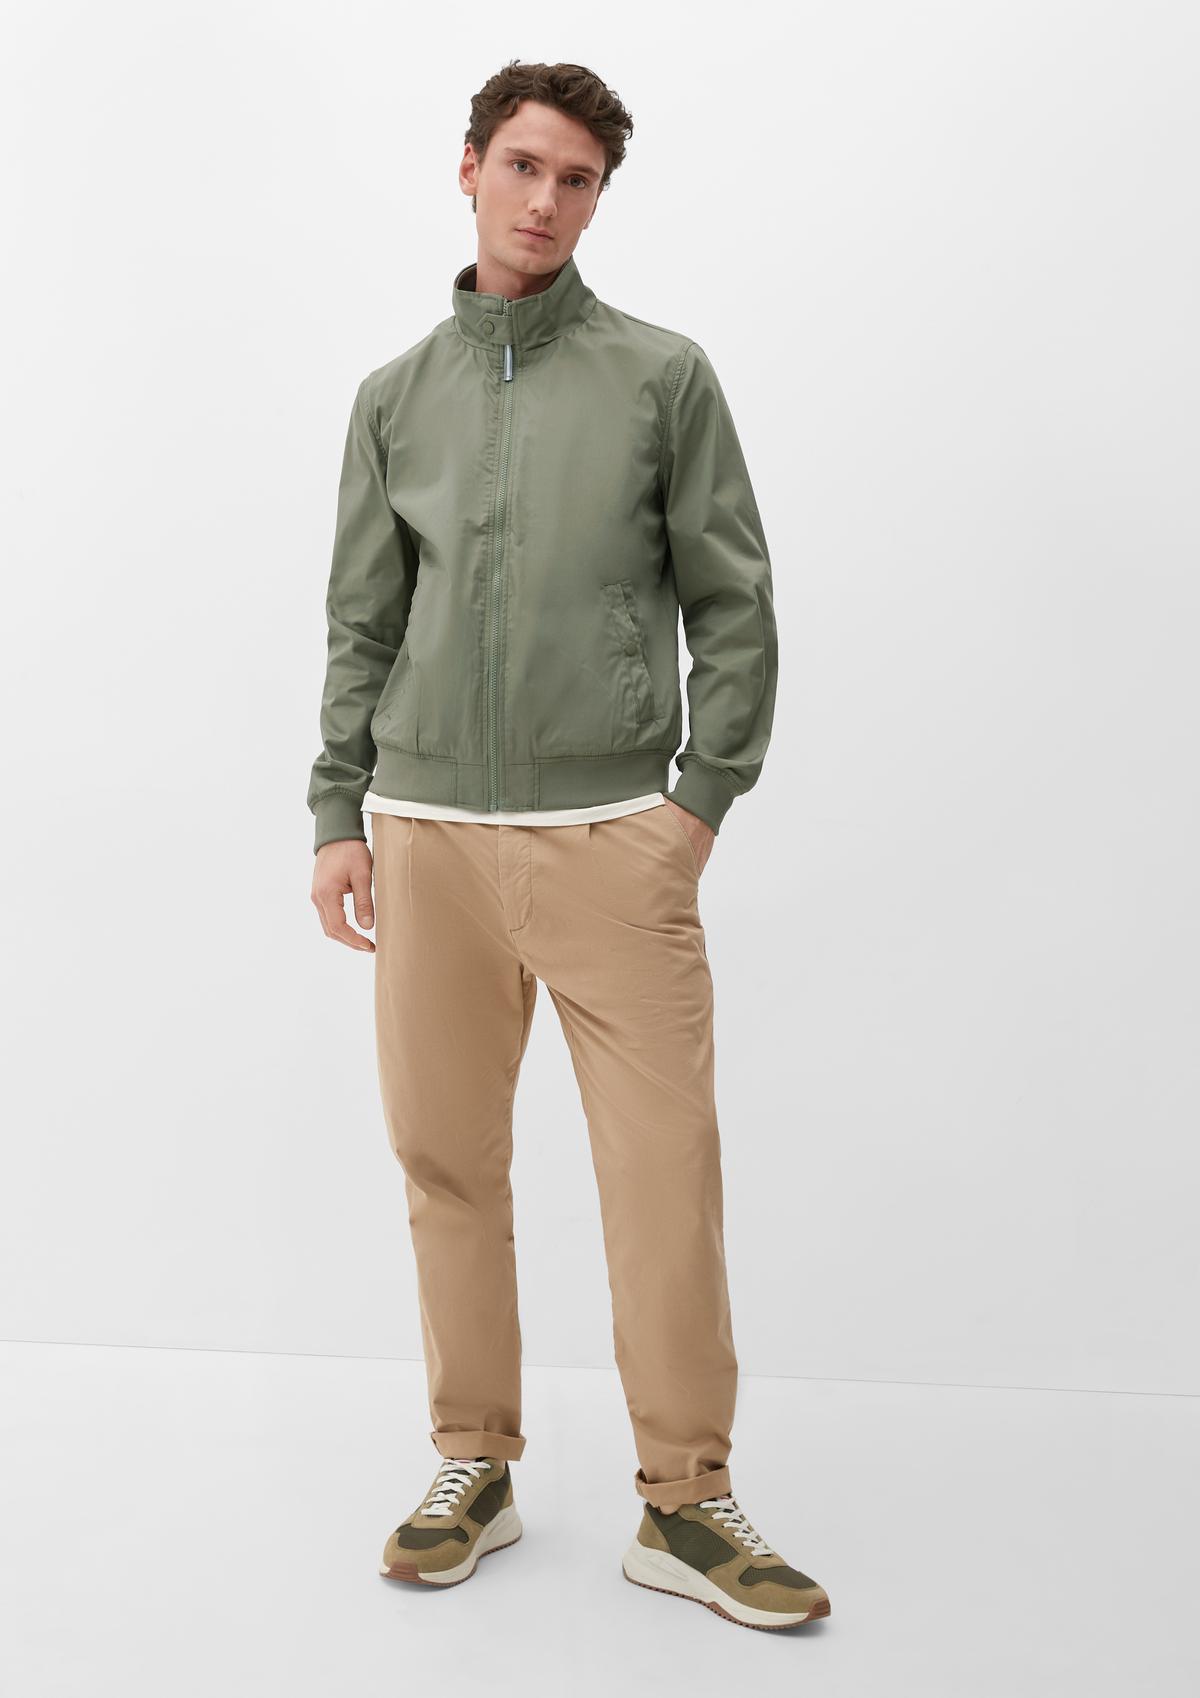 s.Oliver Bomber jacket with a stand-up collar